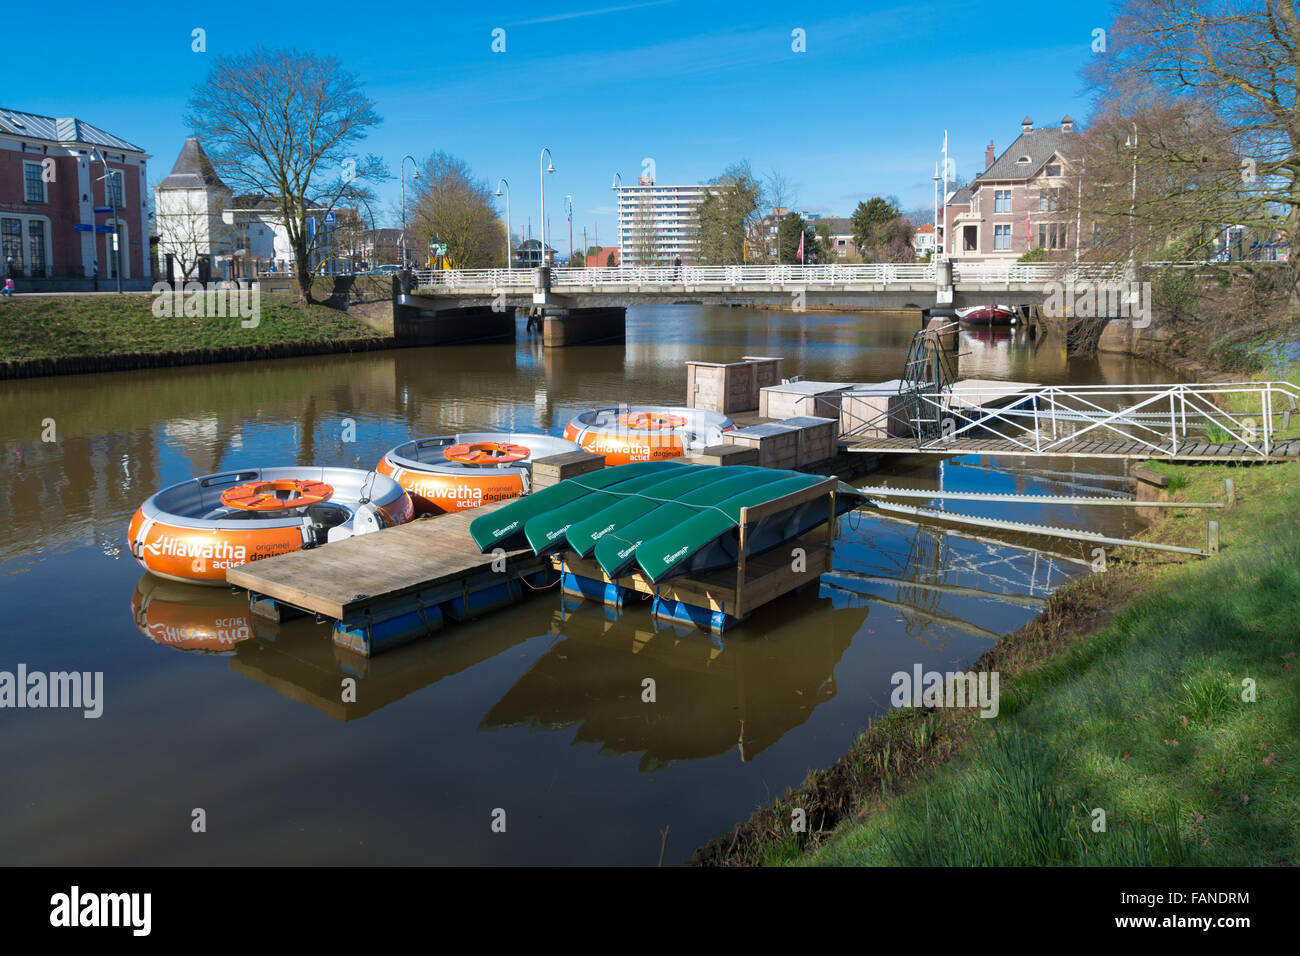 ZWOLLE, NETHERLANDS - MARCH 22, 2015: Recreational boats in a canal of the hanseatic city of zwolle, netherlands Stock Photo